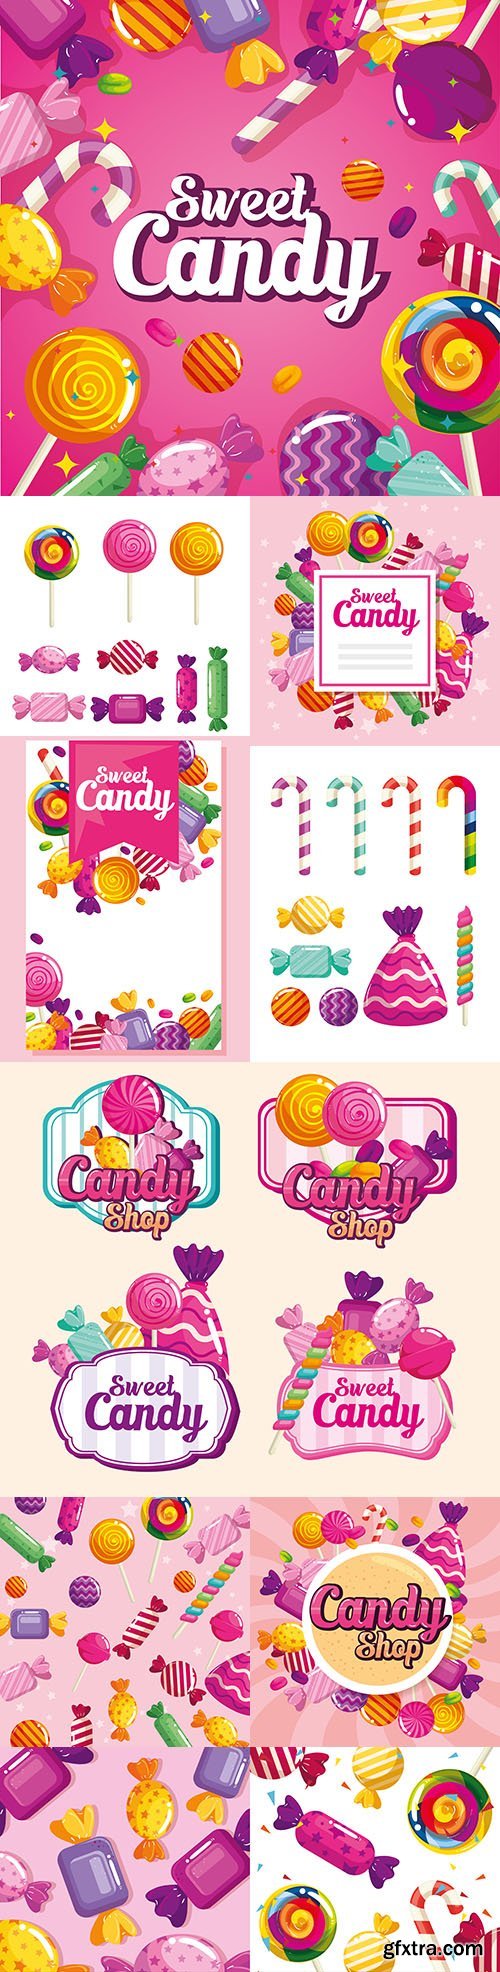 Sweet lollipop and candy delicious dessert painted illustrations